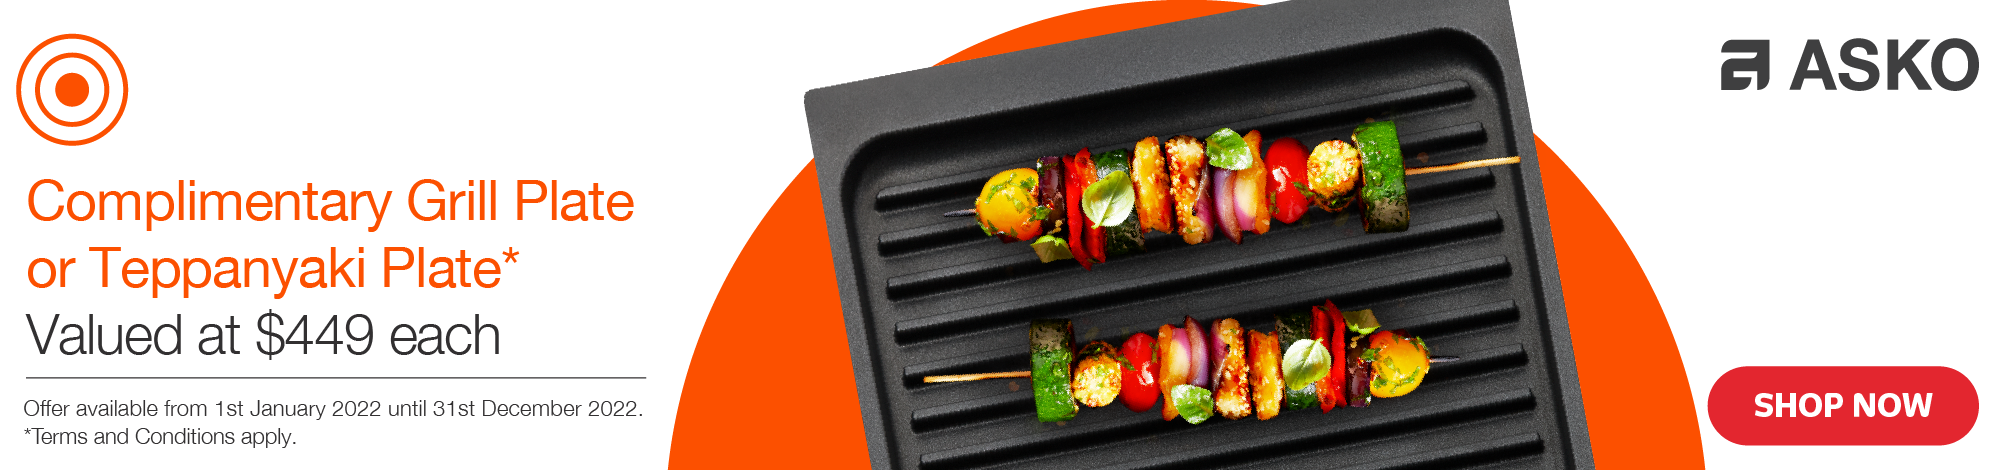 Bonus Teppanyaki Or Grill Plate With Selected ASKO Induction Cooktops